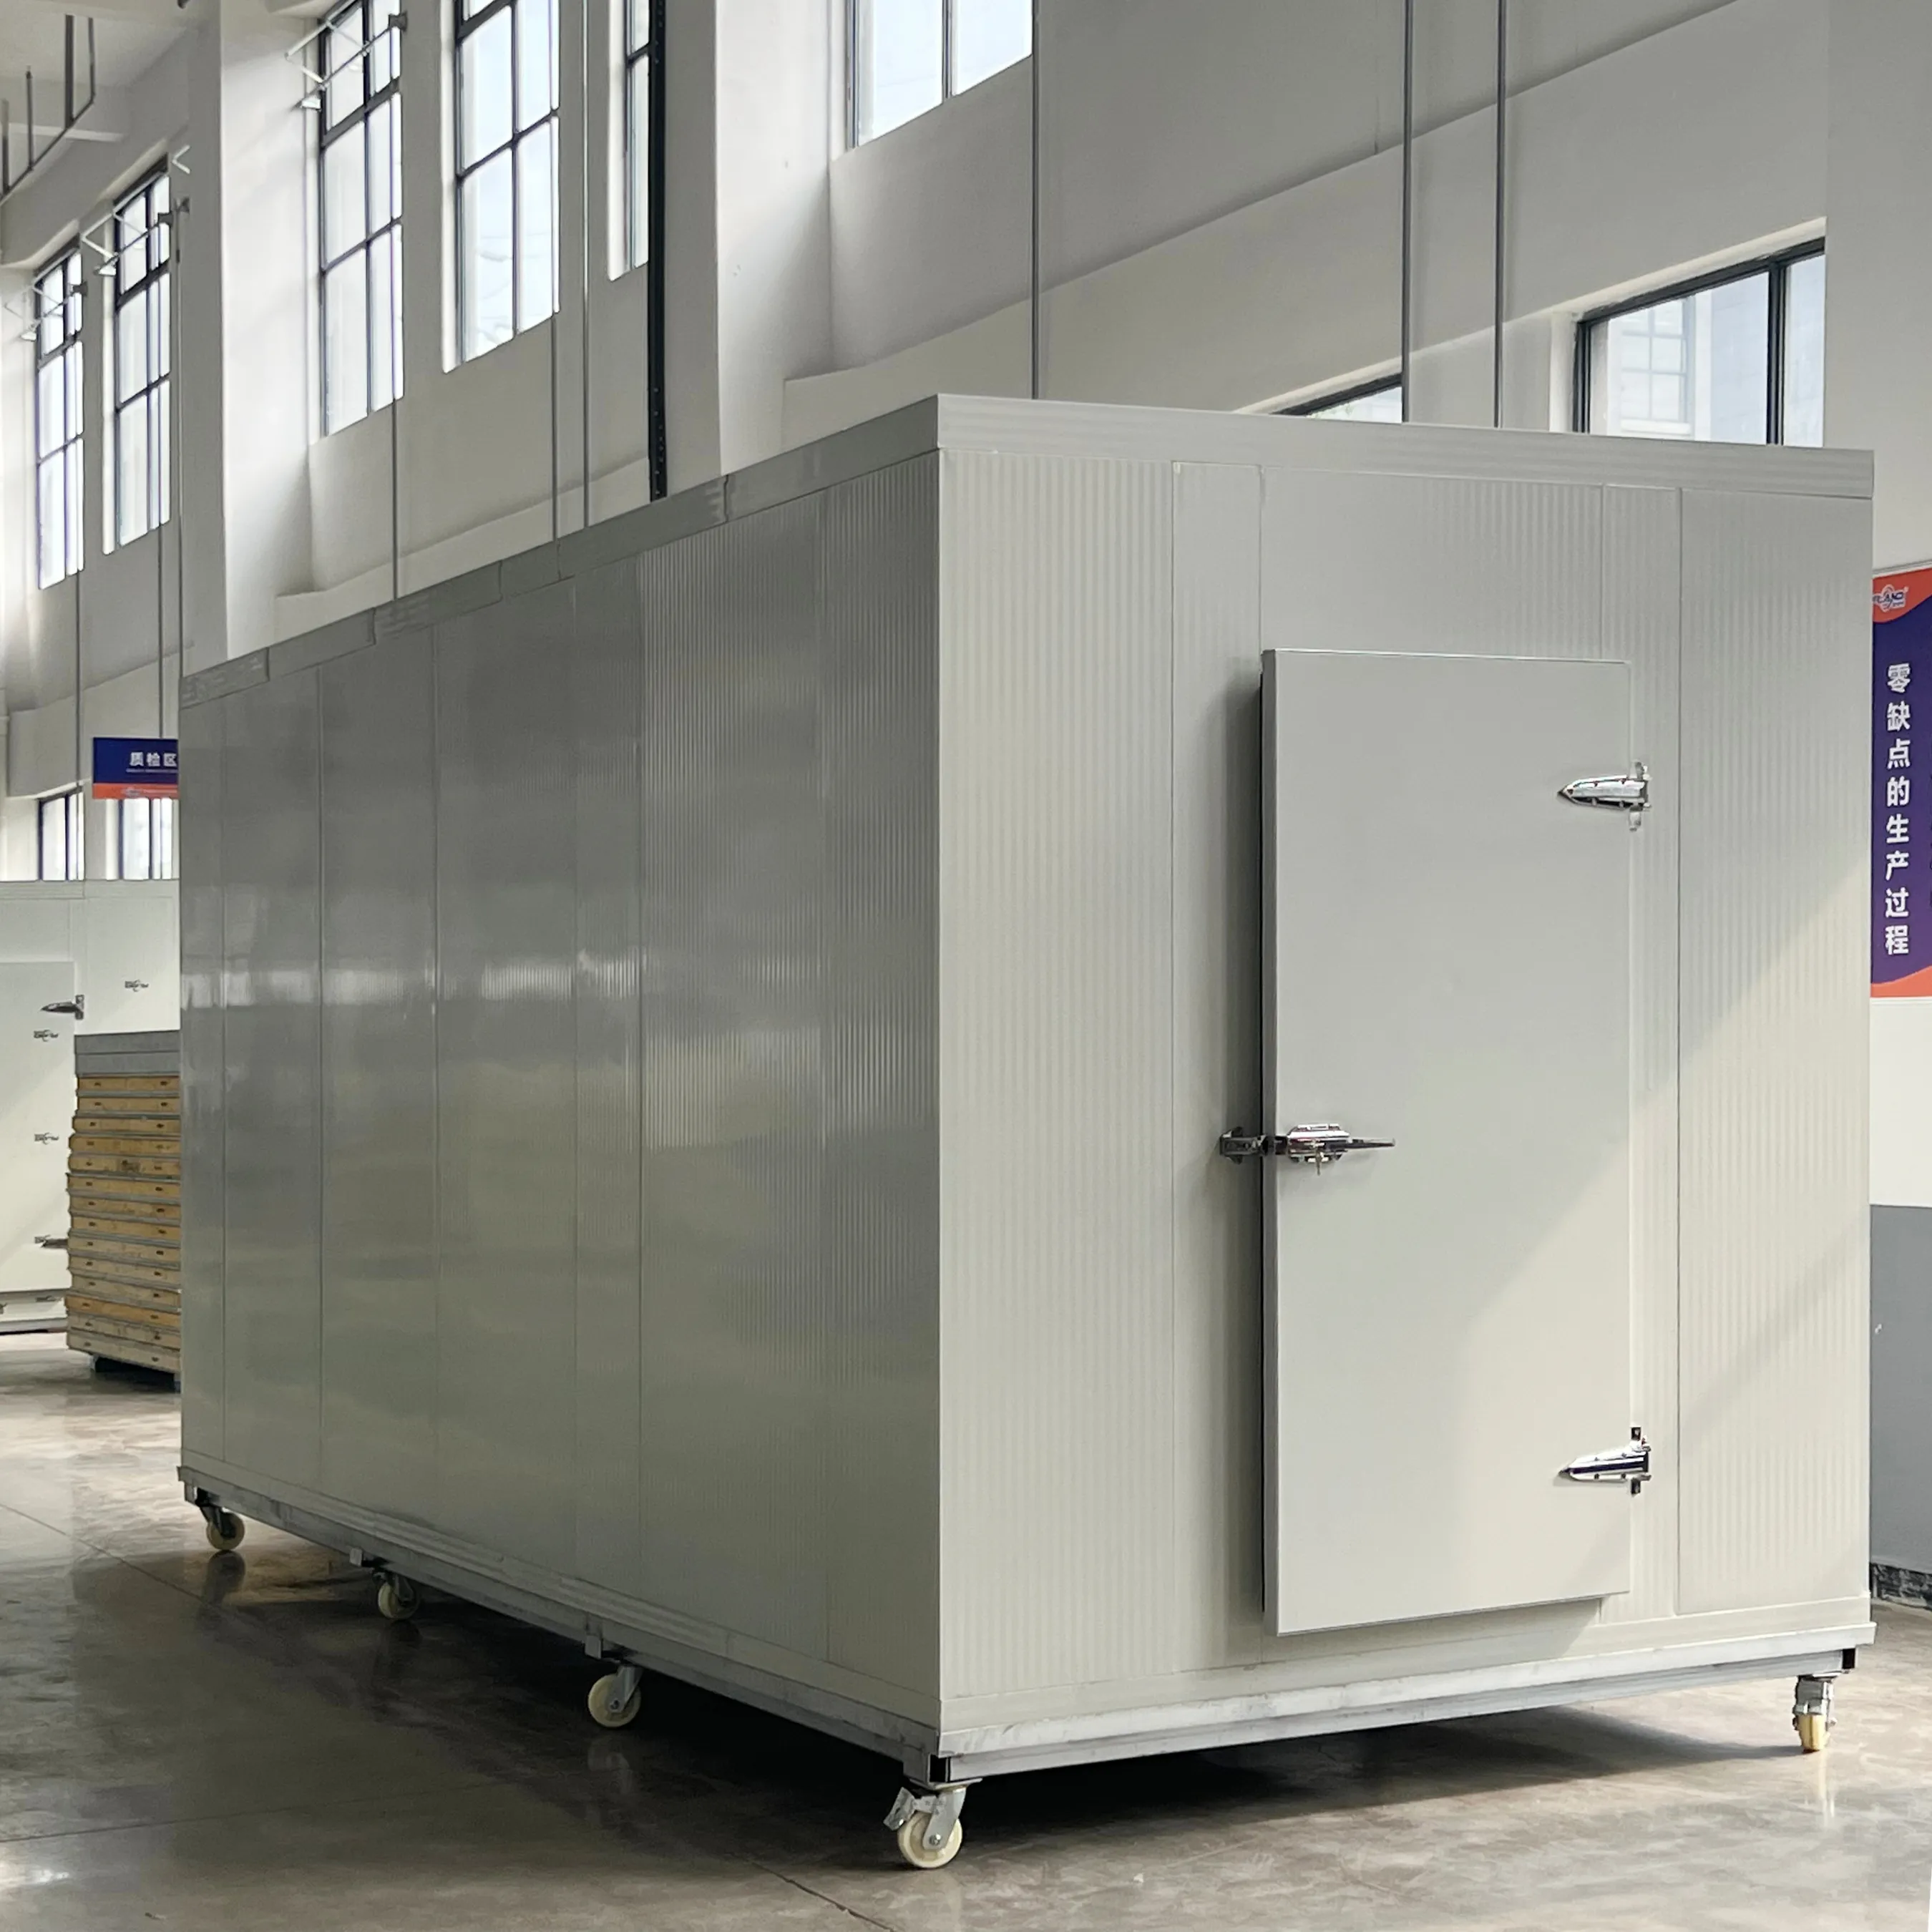 Cold Room Supermarket Cold Storage Room Walk in Cooler Freezer Containers Refrigeration Equipment Fan Cooling